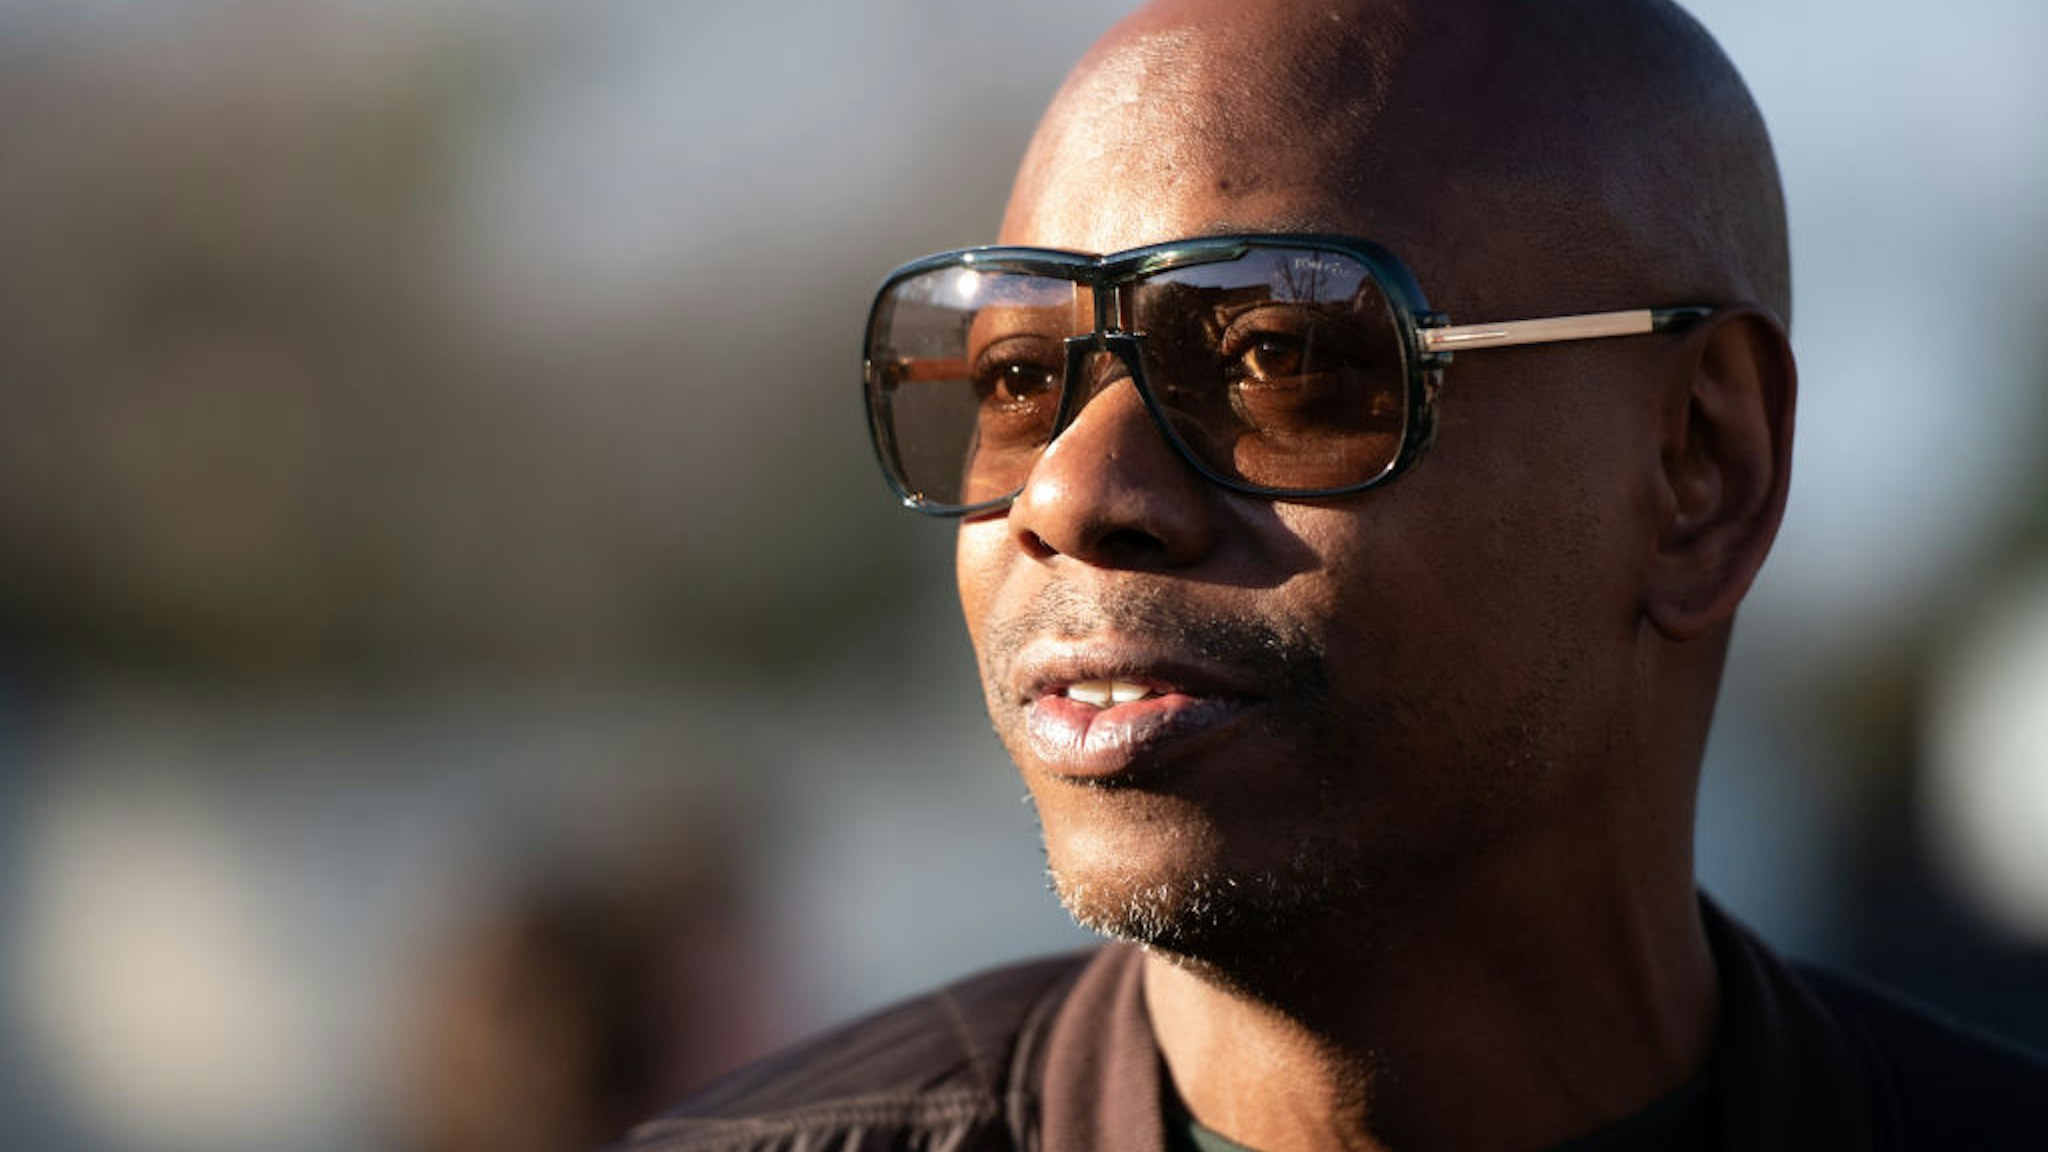 CHARLESTON, SC - JANUARY 30: Comedian Dave Chappelle campaigns for Democratic presidential candidate Andrew Yang on January 30, 2020 in North Charleston, South Carolina. The comedian has endorsed the candidate and performs the second of two South Carolina campaign benefit shows Thursday evening in Charleston. (Photo by Sean Rayford/Getty Images)